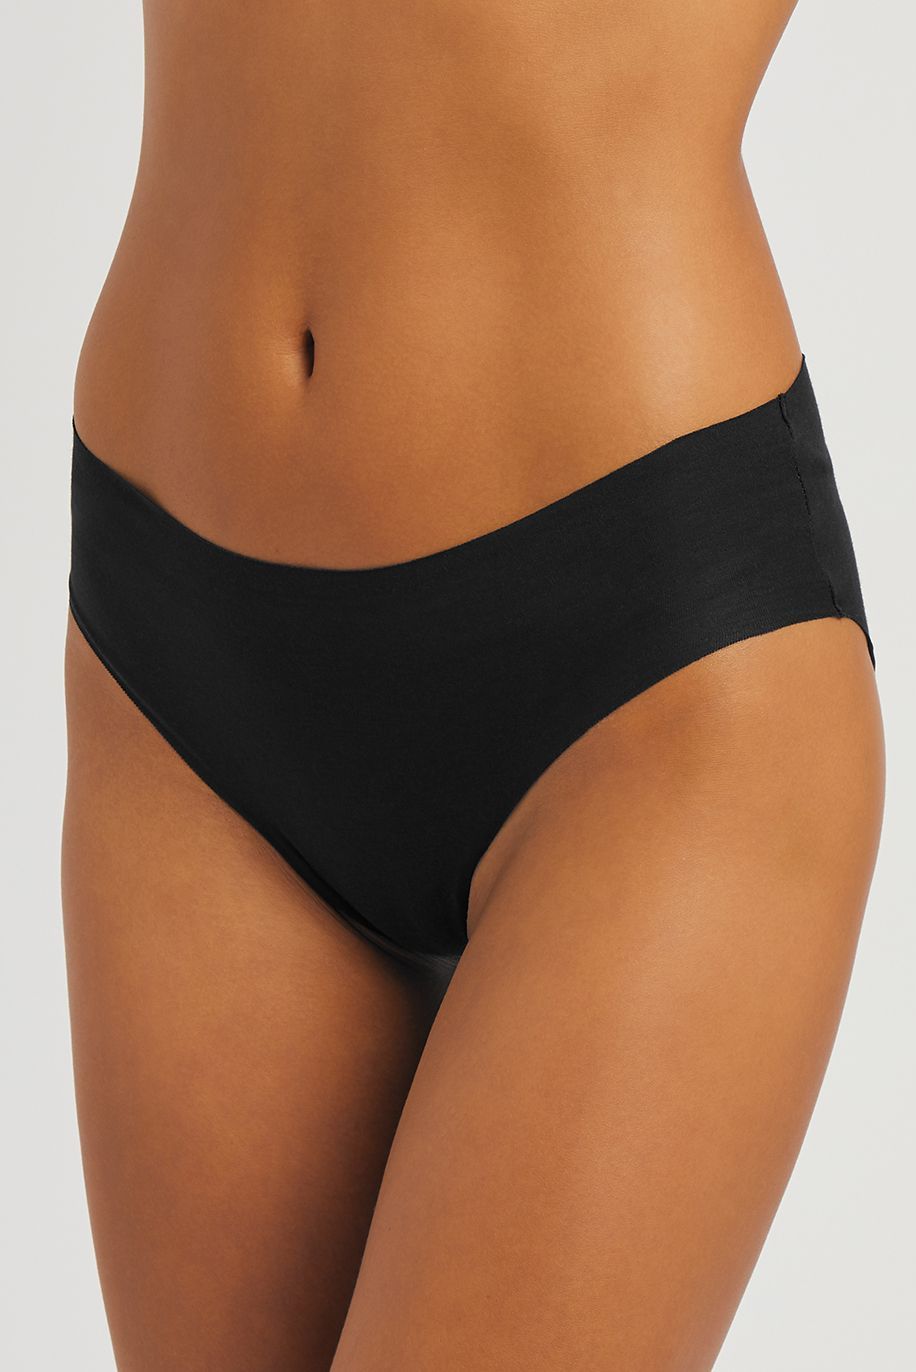  HANRO Women's Invisible Cotton Thong, Black, Small : Clothing,  Shoes & Jewelry